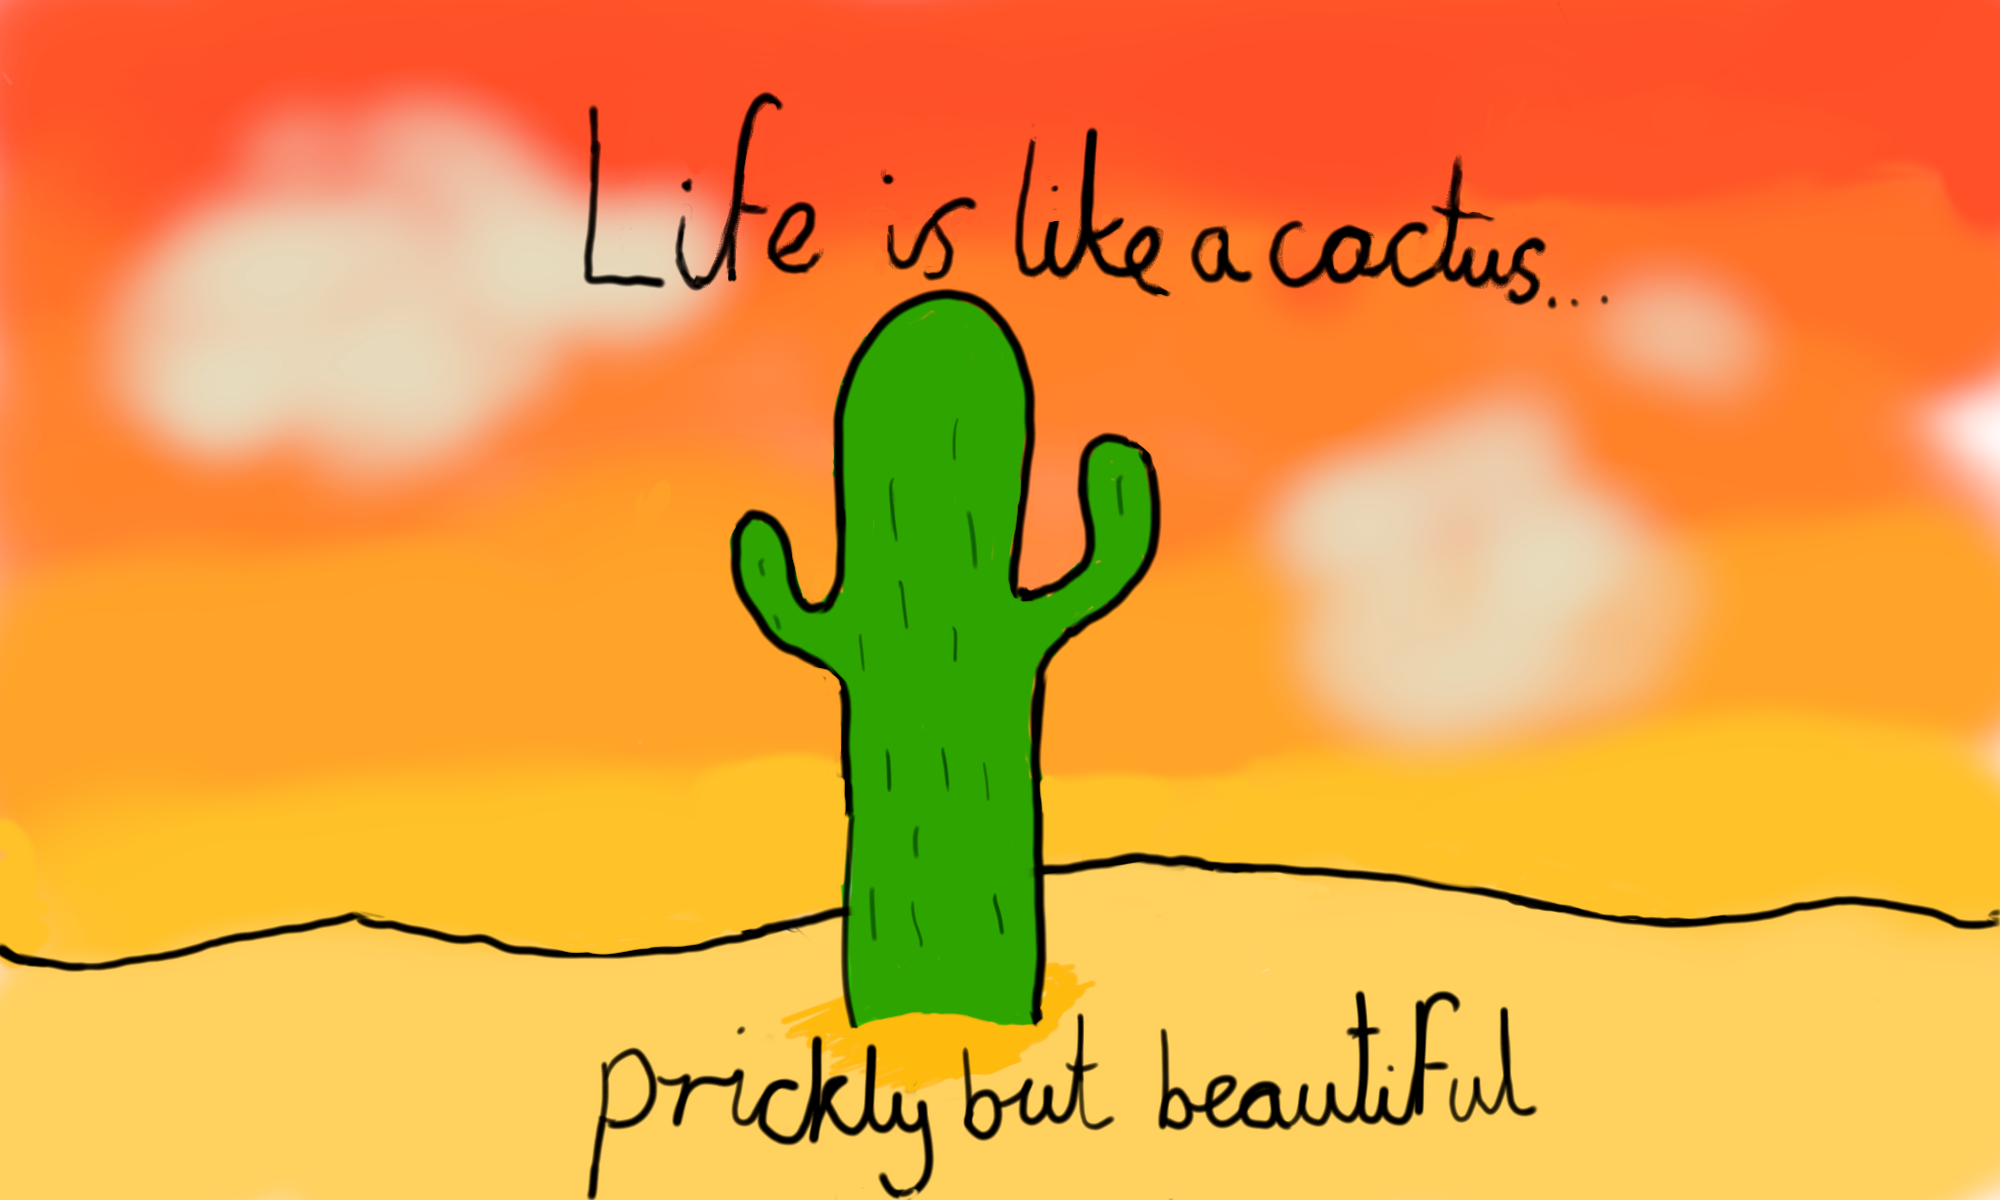 'Cactus' by Grace (10) from Dublin